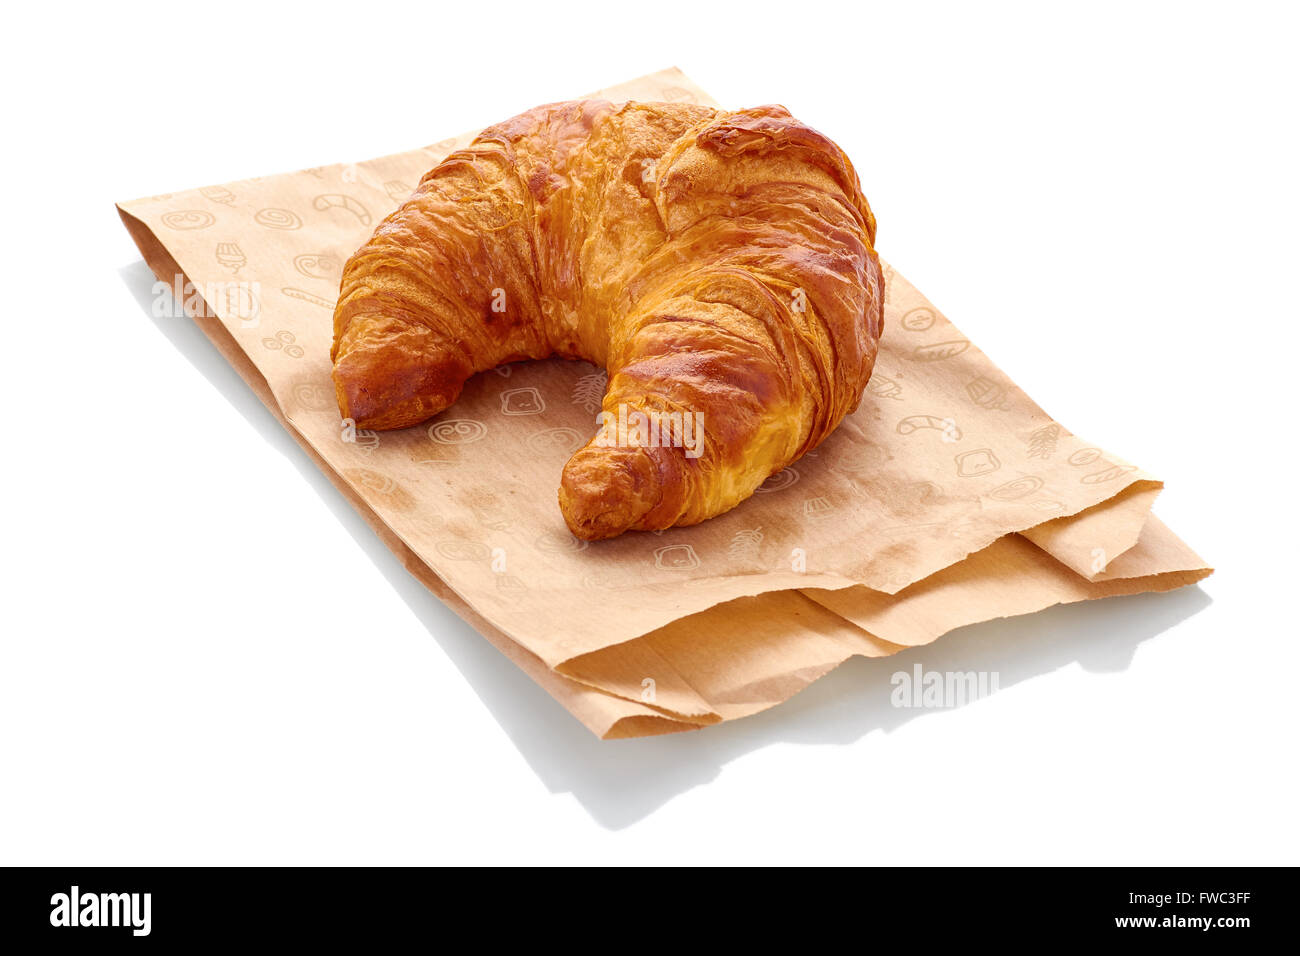 fresh croissant with paper bag on white background Stock Photo